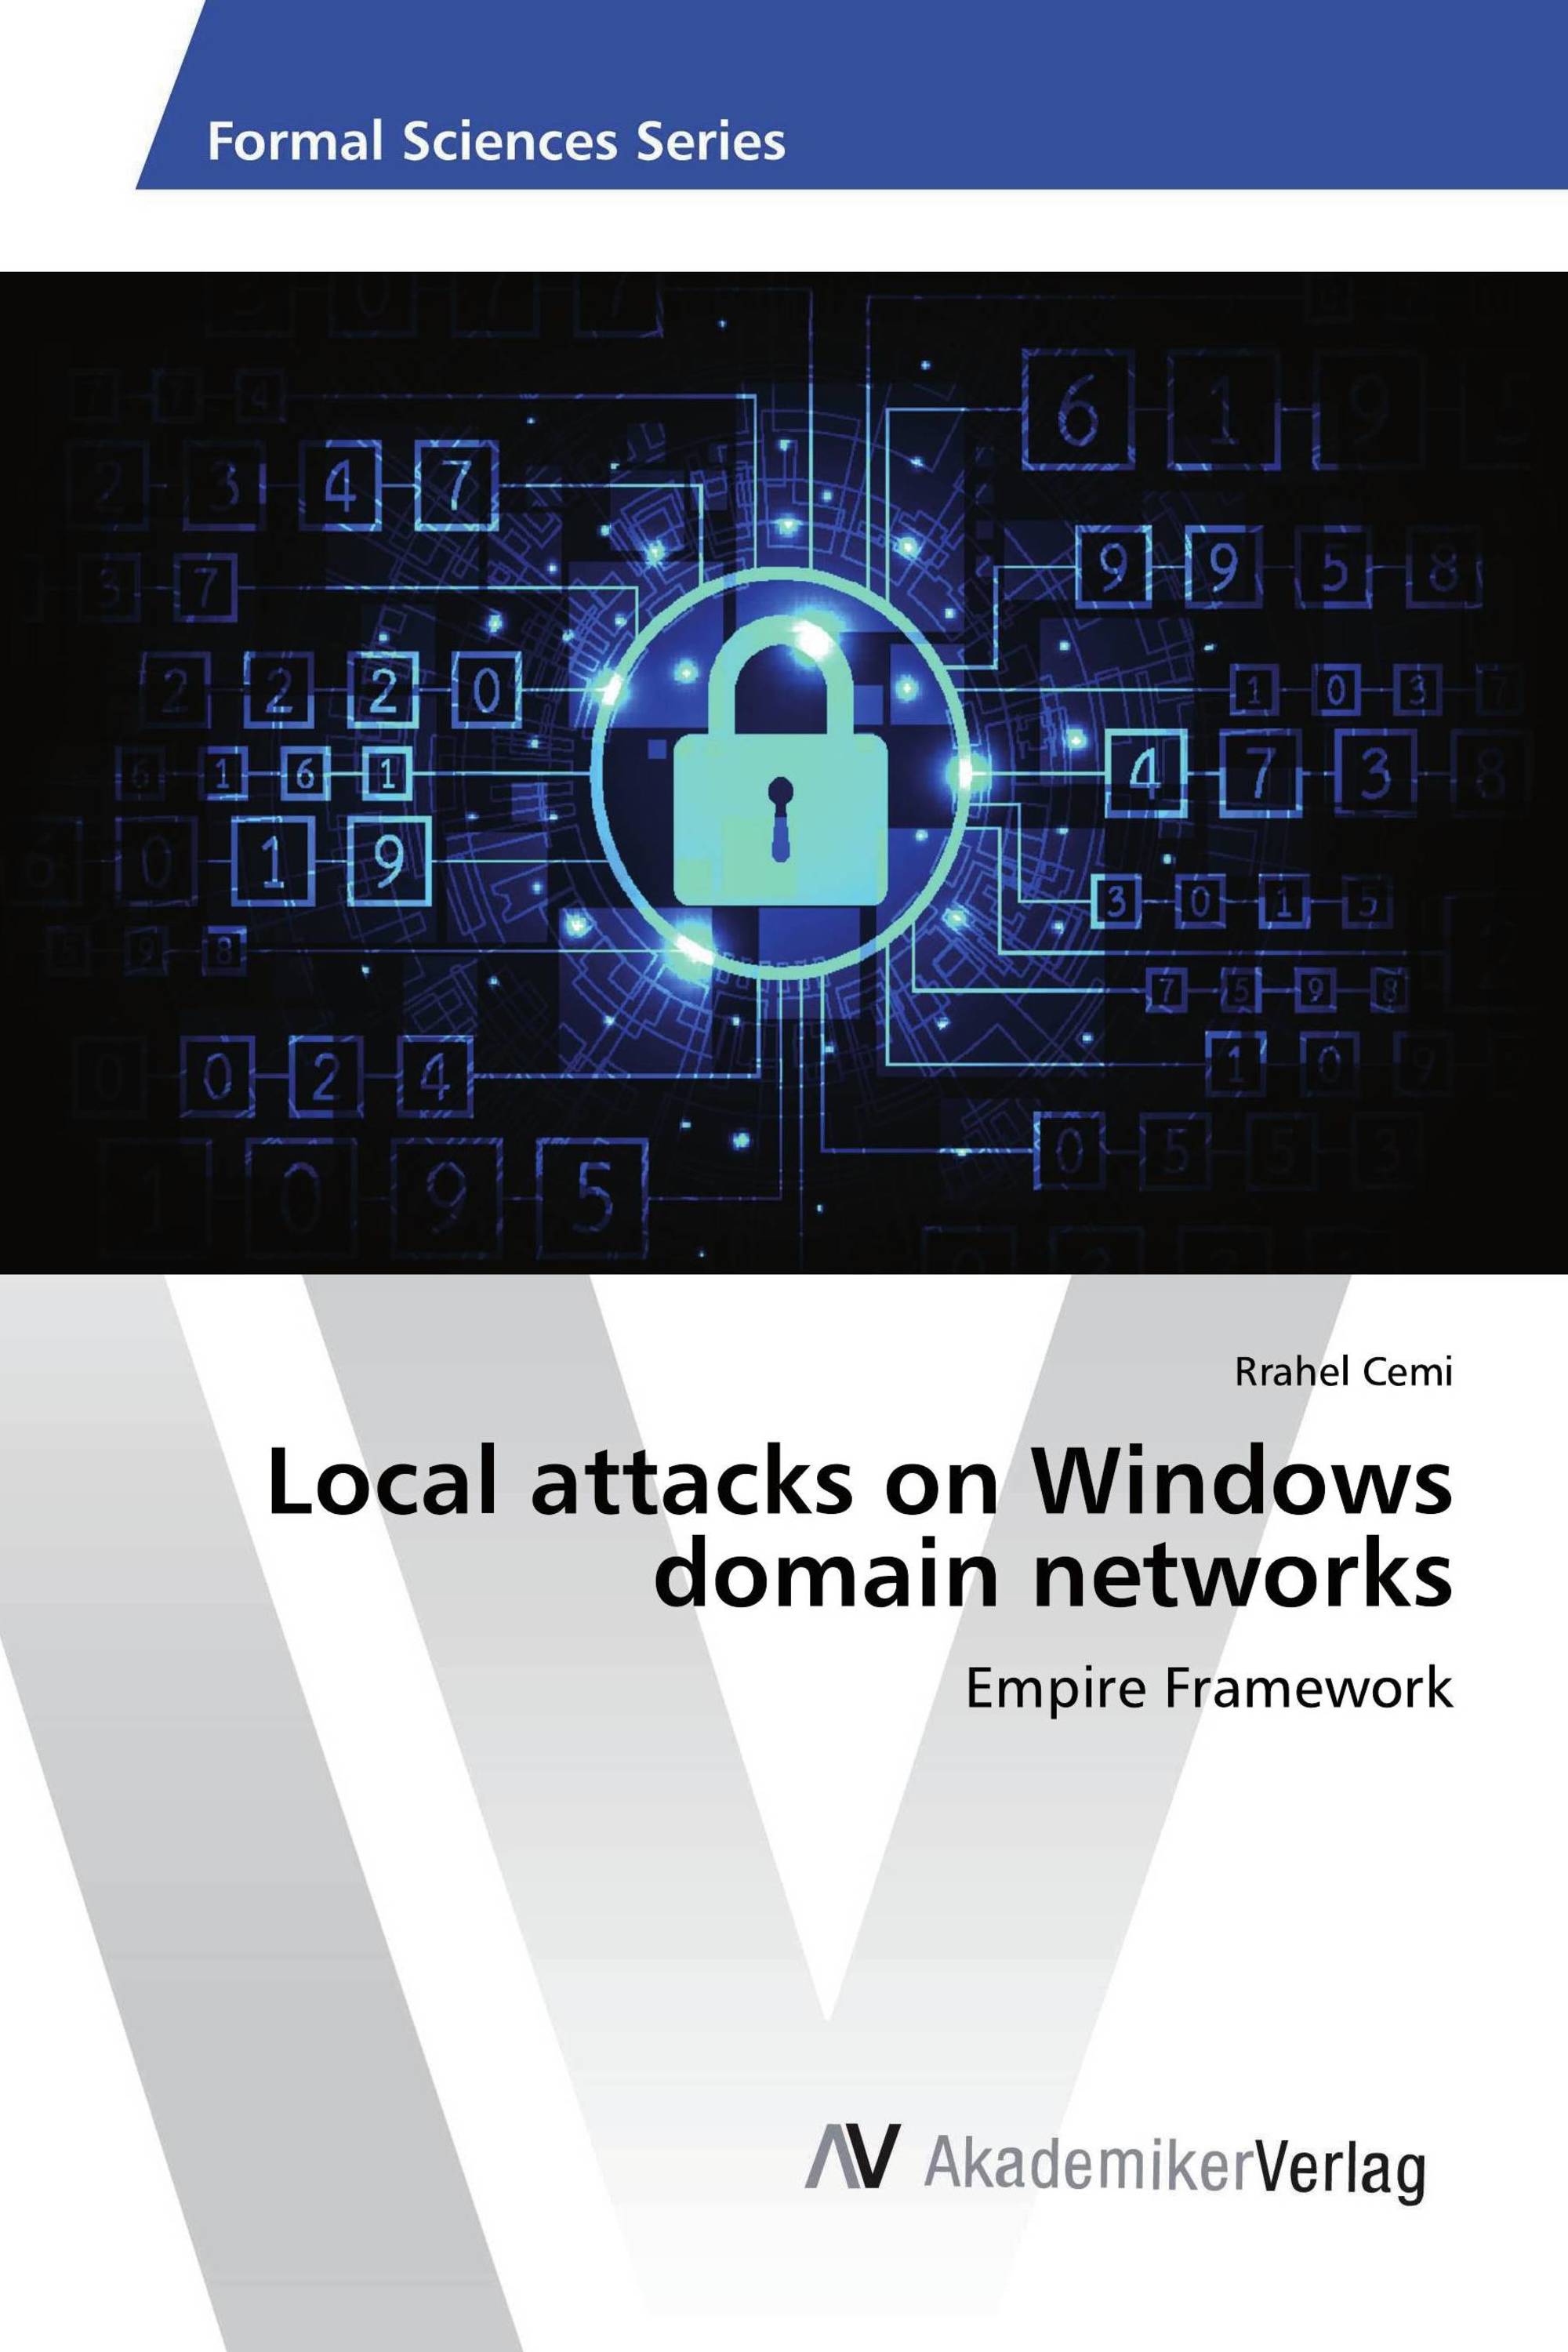 Local attacks on Windows domain networks